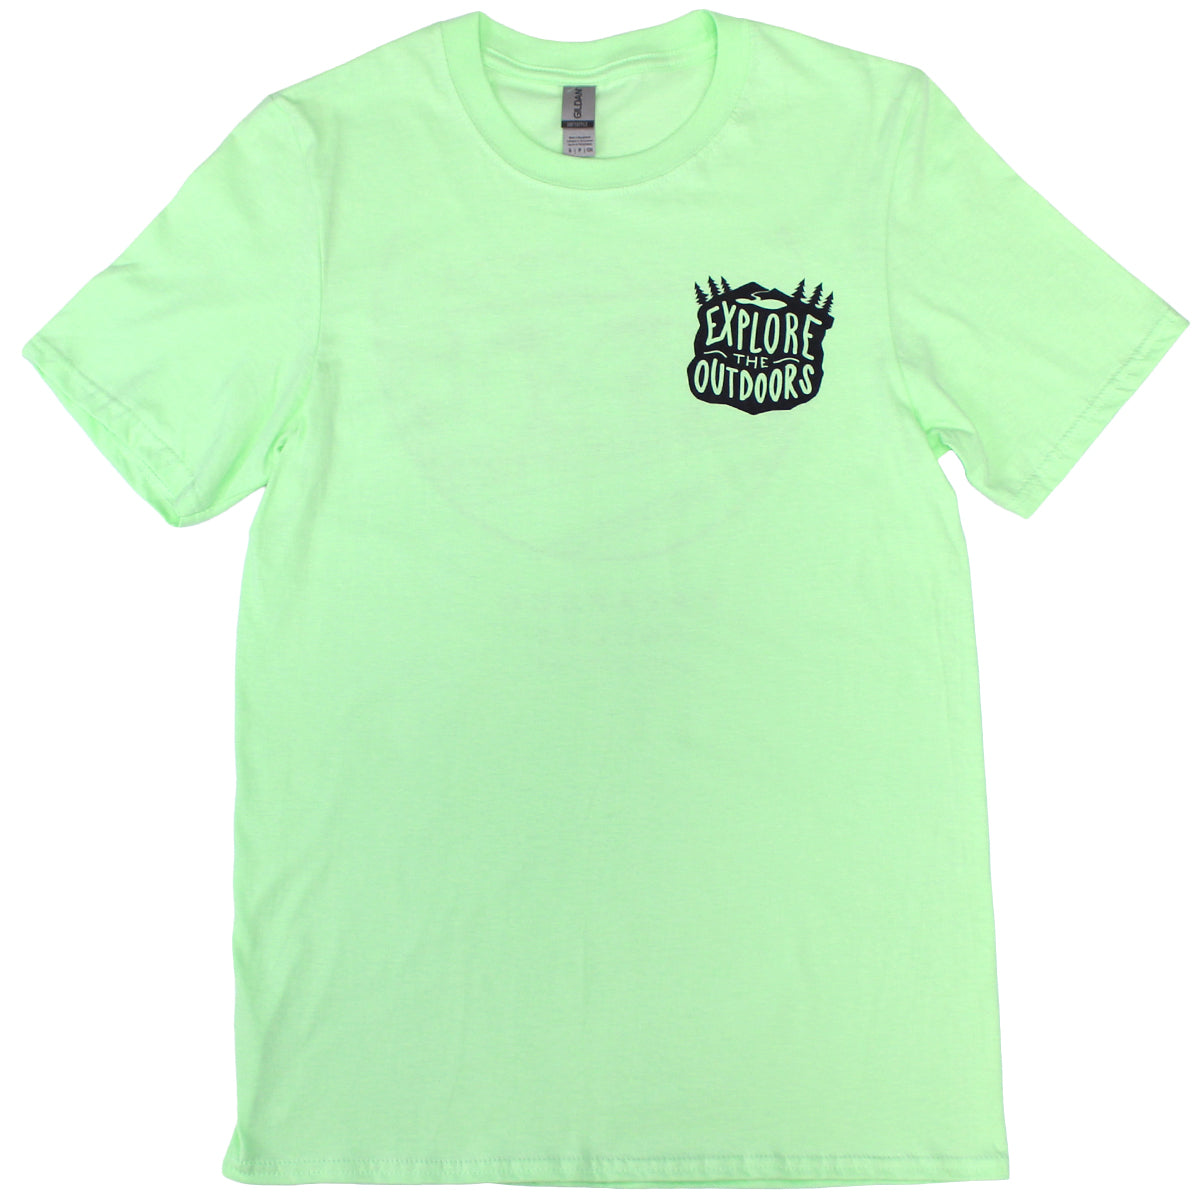 Patapsco Valley State Park (Mint Green) / Shirt - Route One Apparel